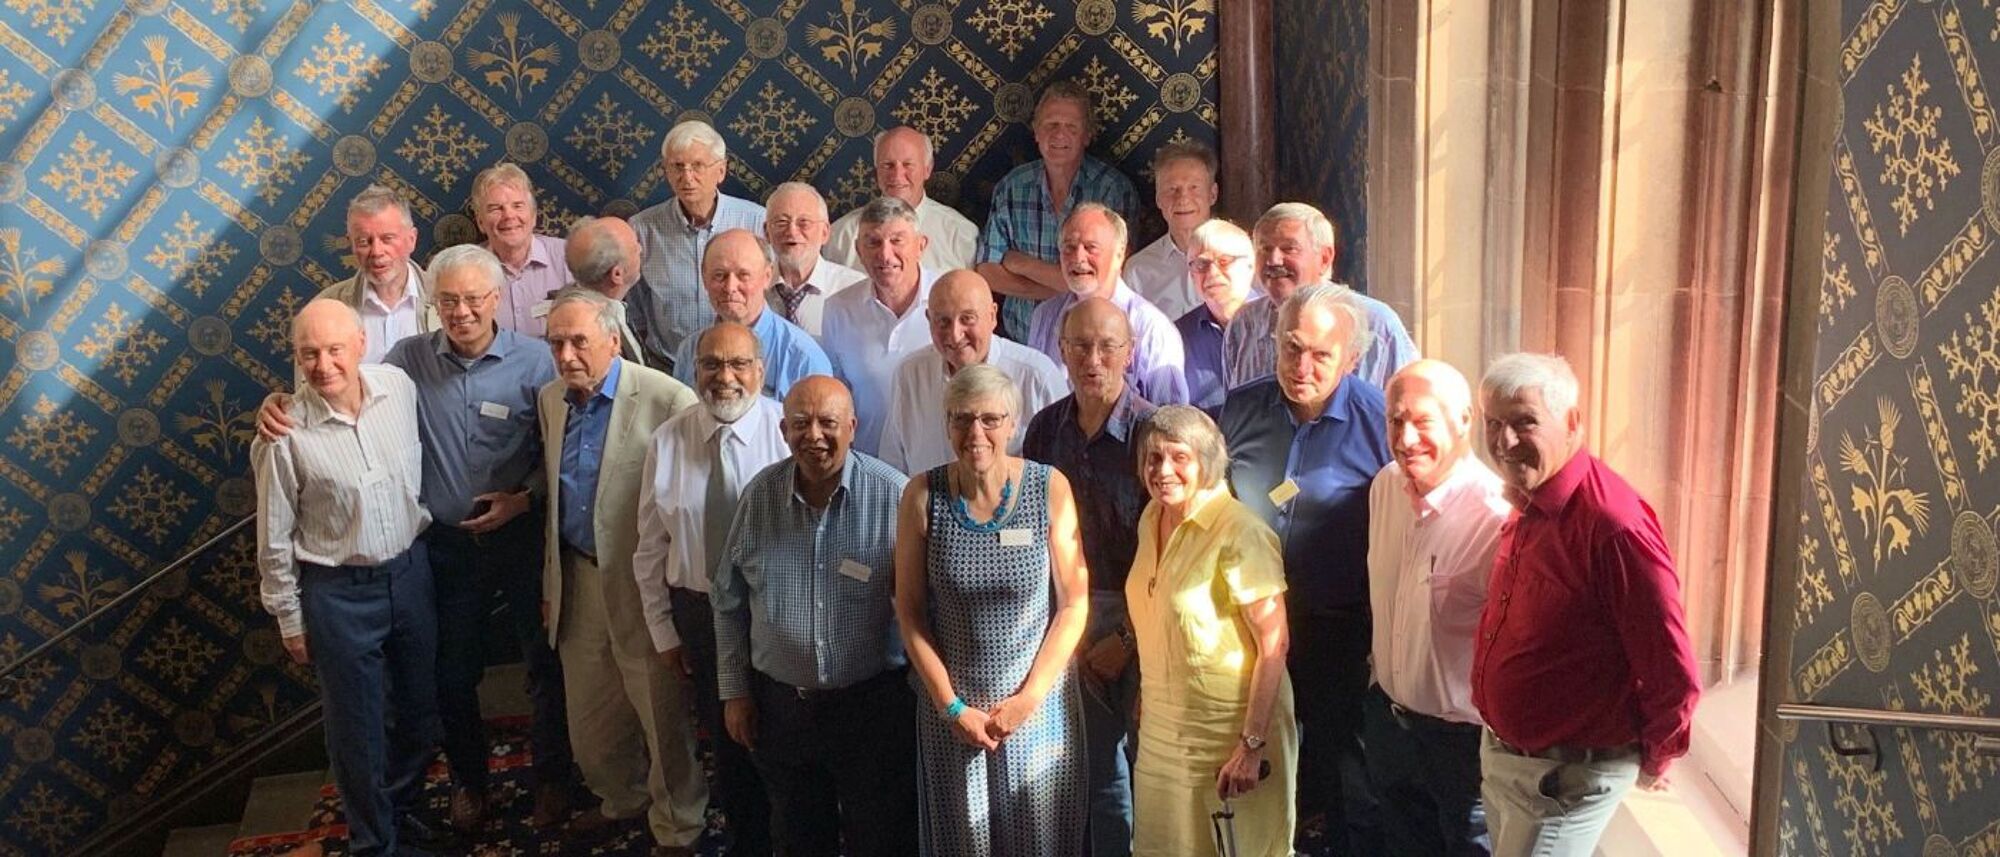 Group photo of the reunion of the class of 1974 class of Electrical Engineering 